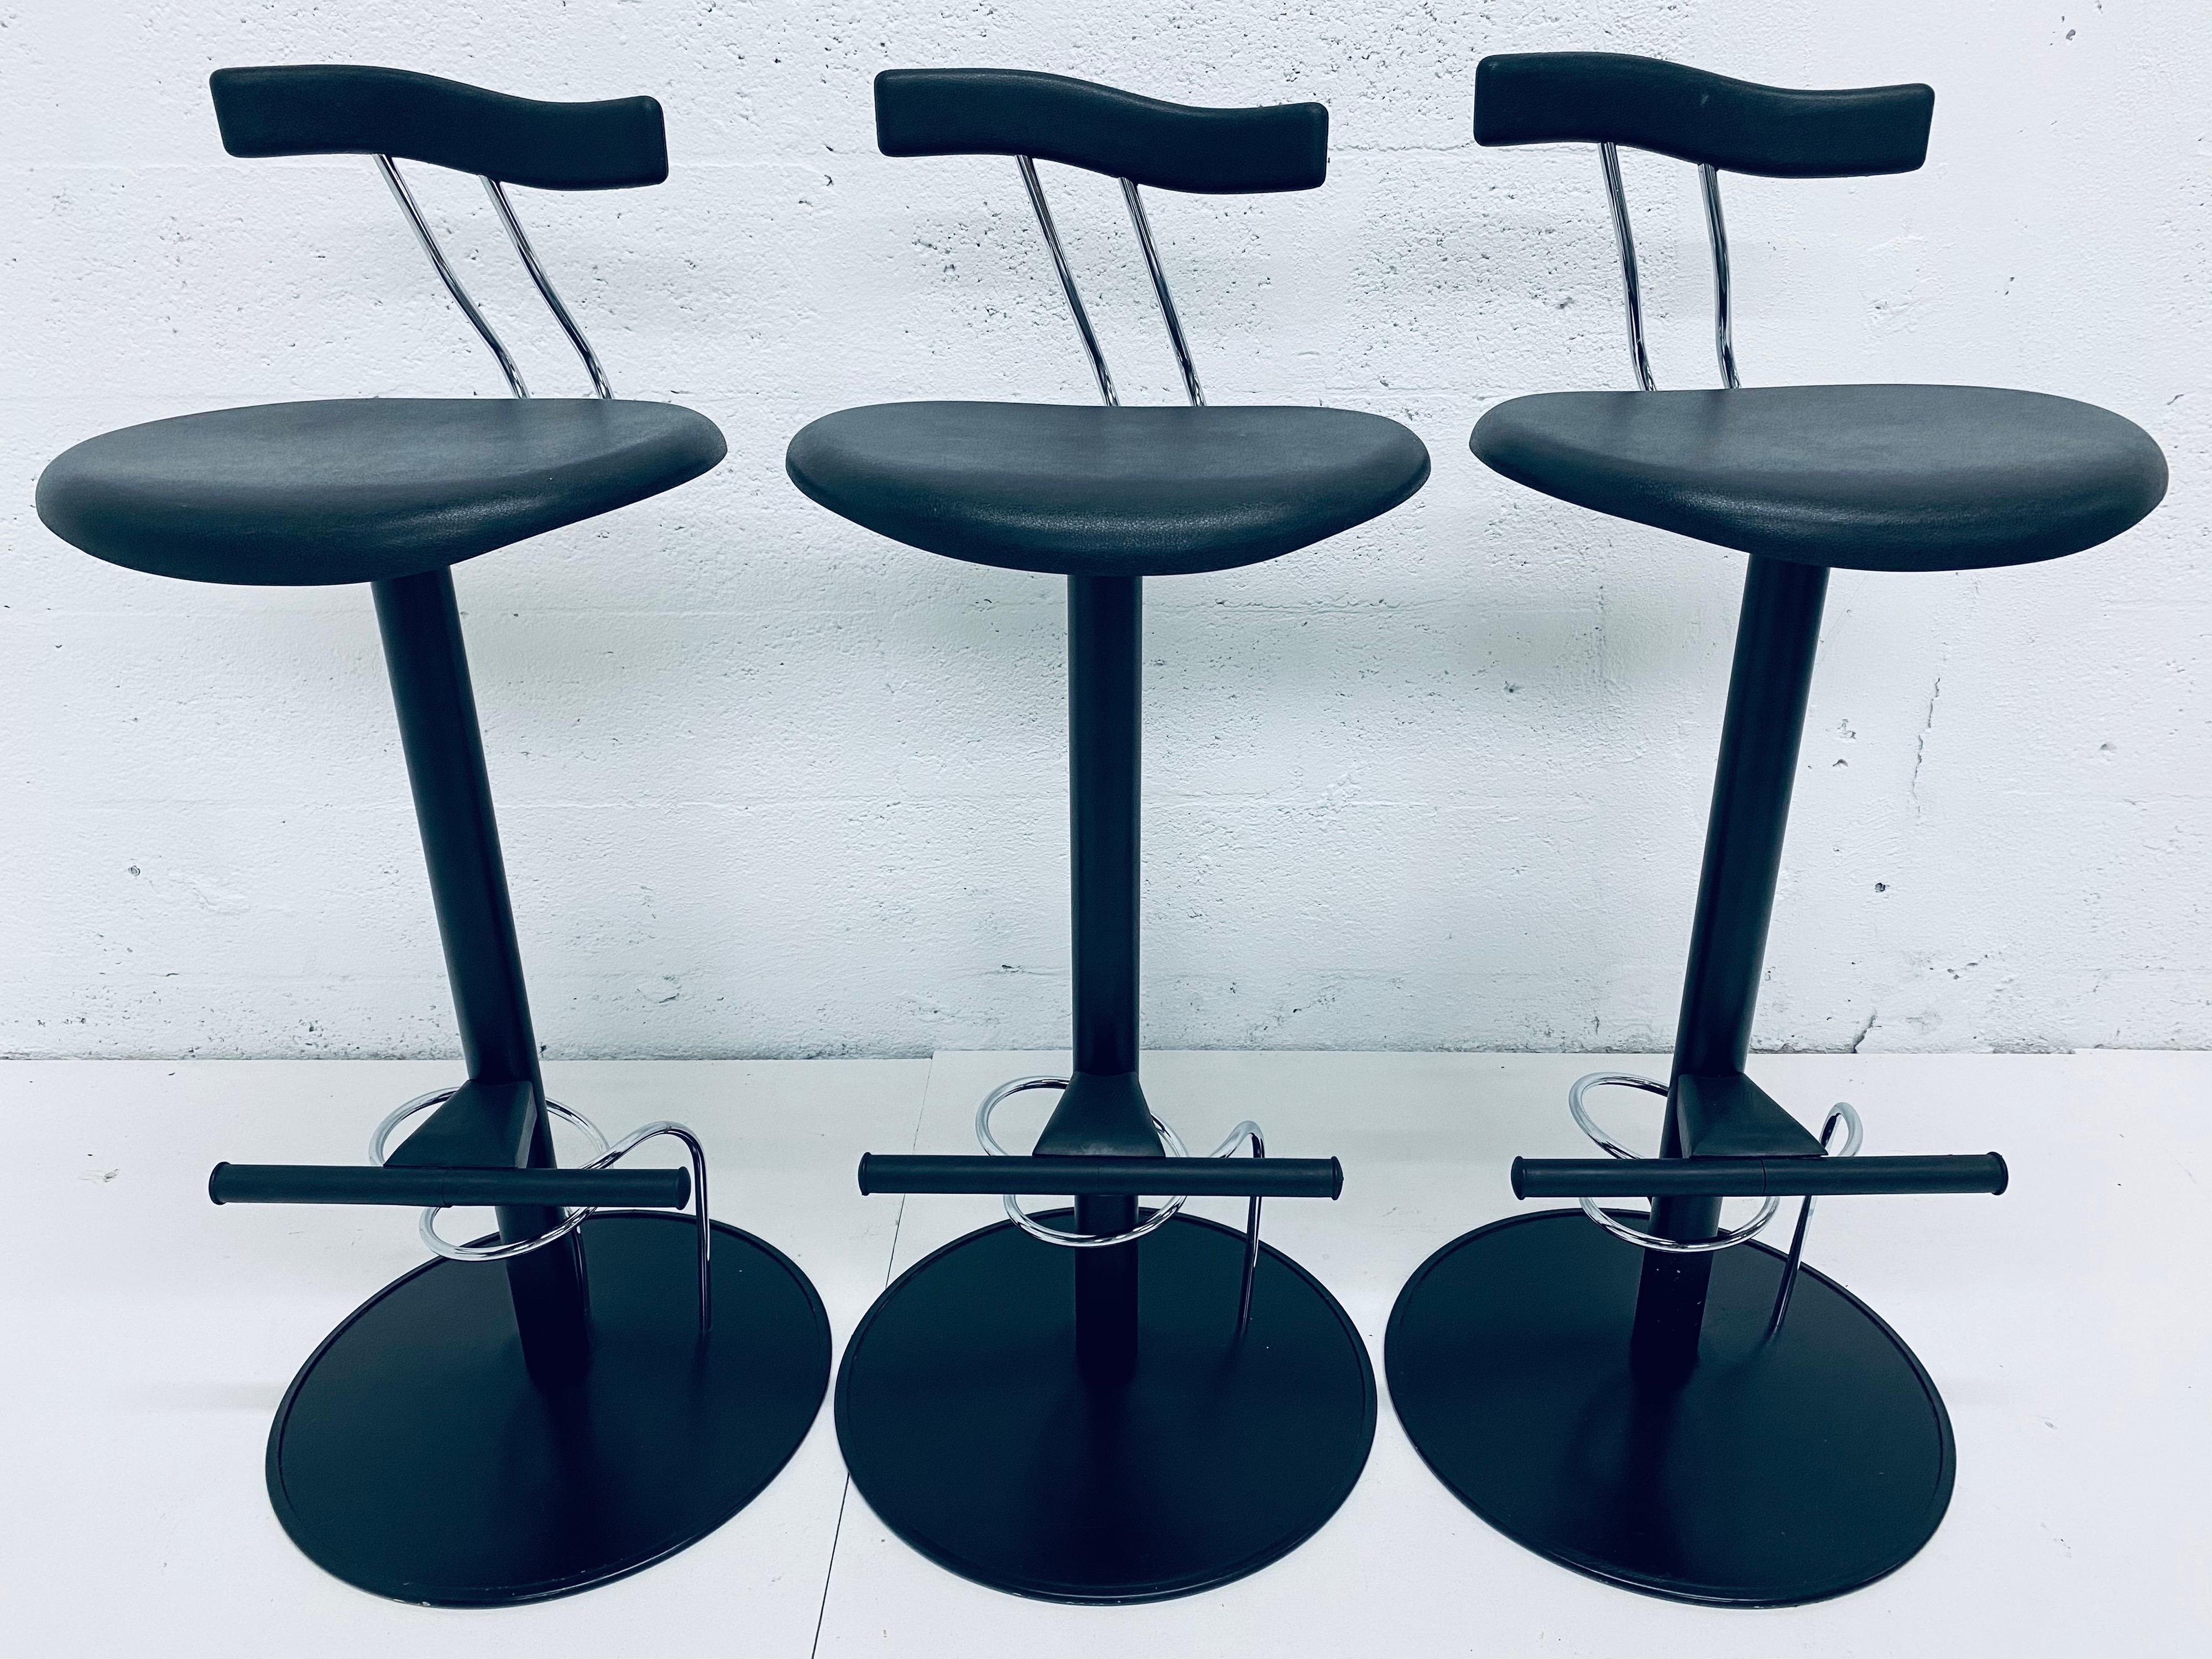 Three bar height Italian Postmodern bar chairs inspired by Memphis Milano. Made of black lacquered steel with black moulded rubber seats and backs.